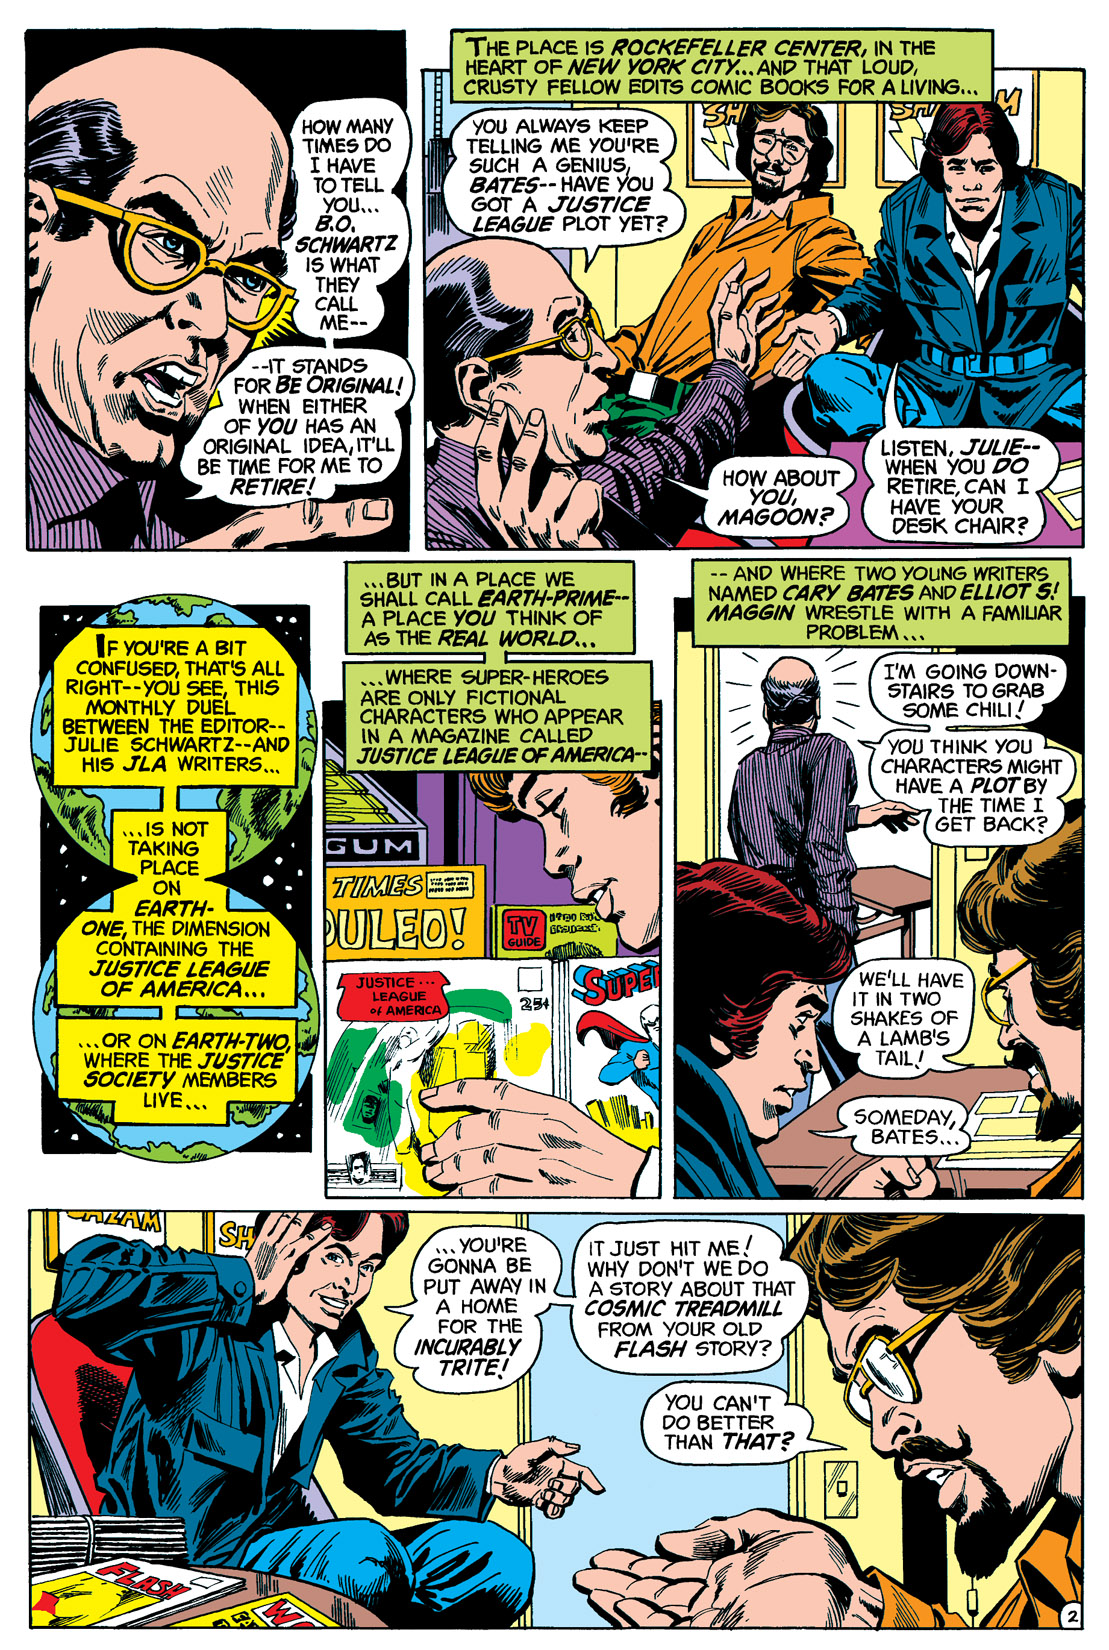 Crisis on Multiple Earths Omnibus: Chapter Crisis-on-Multiple-Earths-26 - Page 3